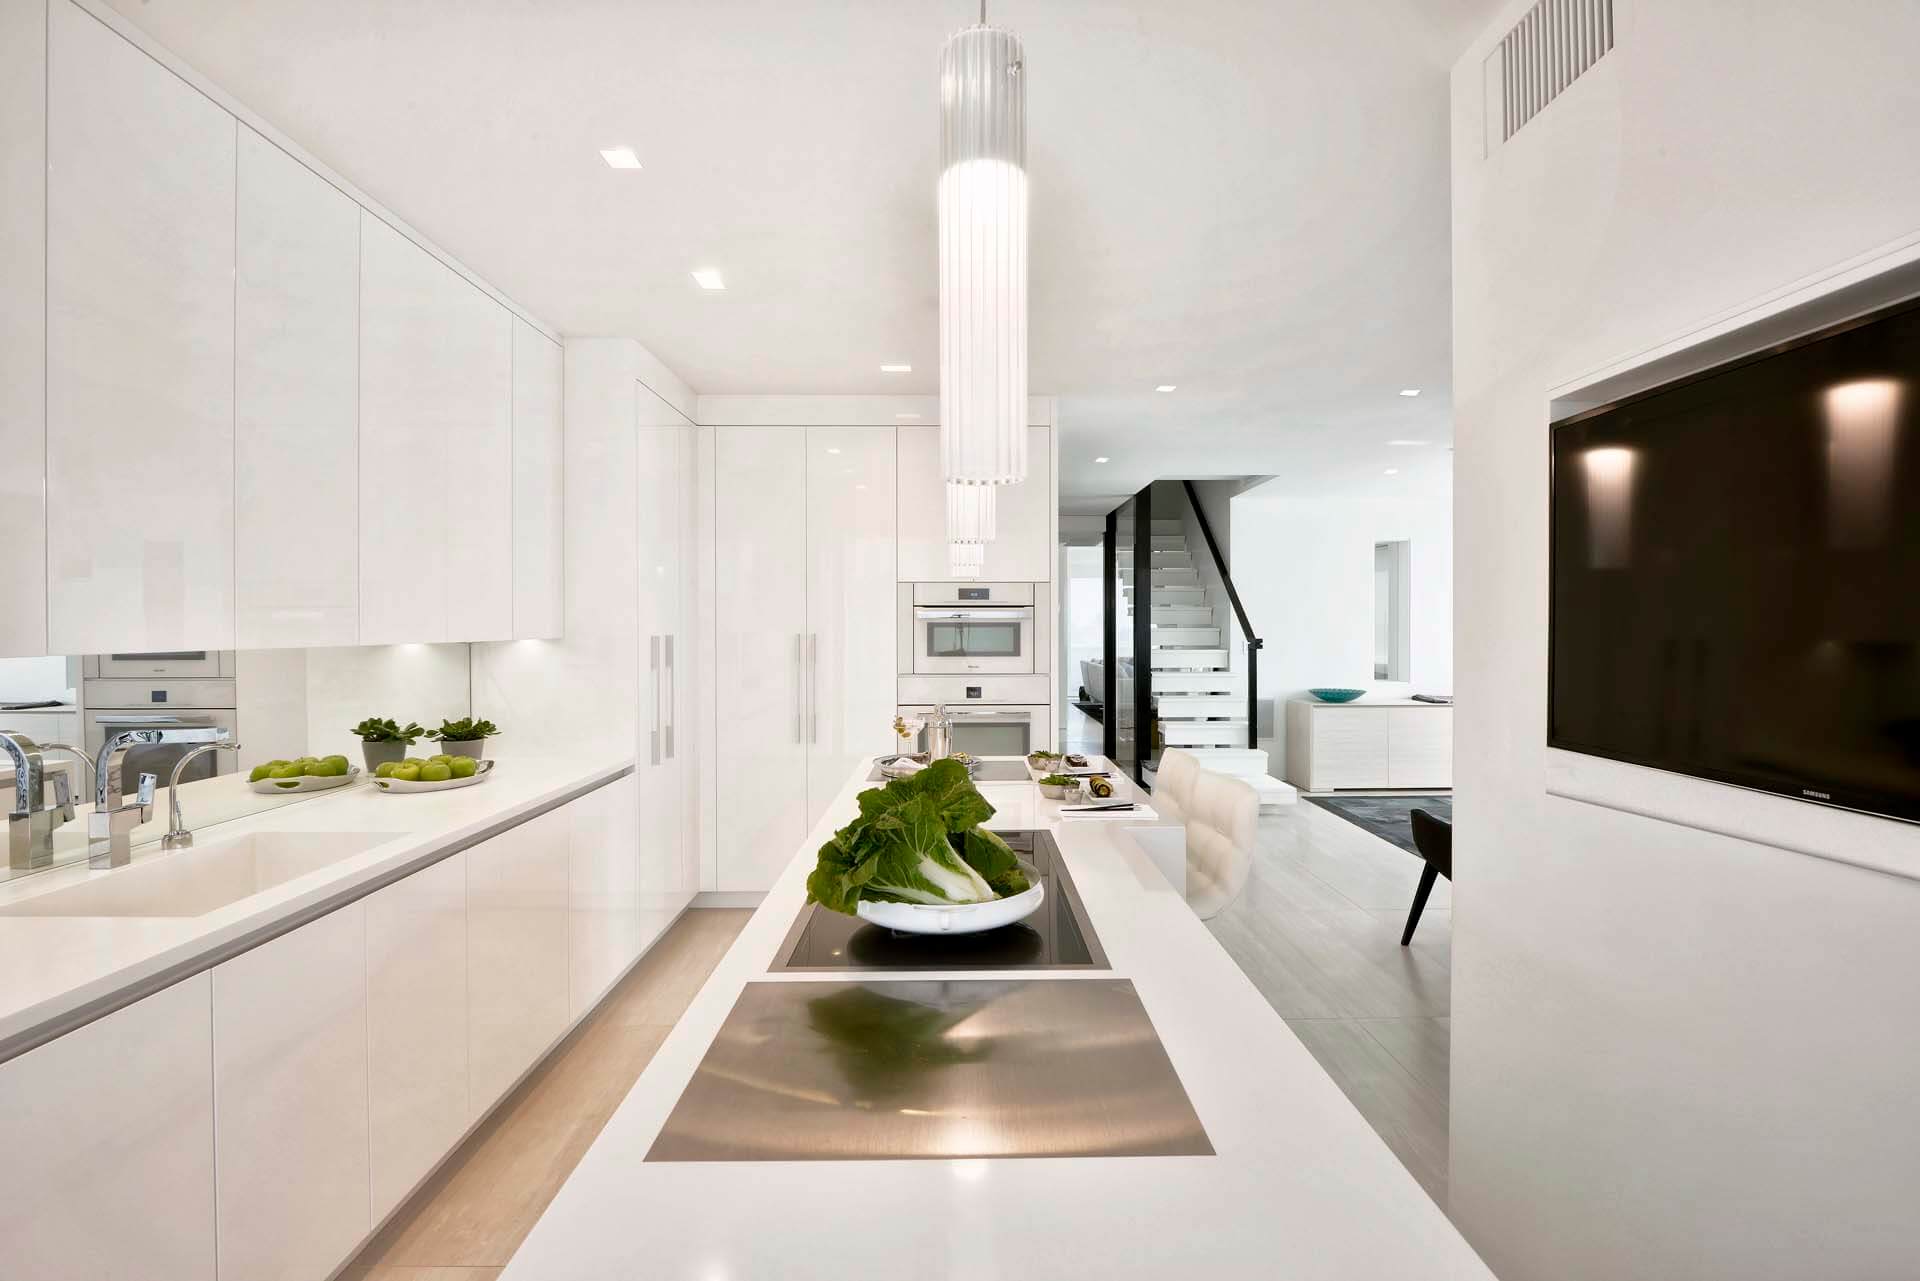 Contemporary high-gloss, all white kitchen with Artcraft cabinets in an Upper East Side Manhattan loft.